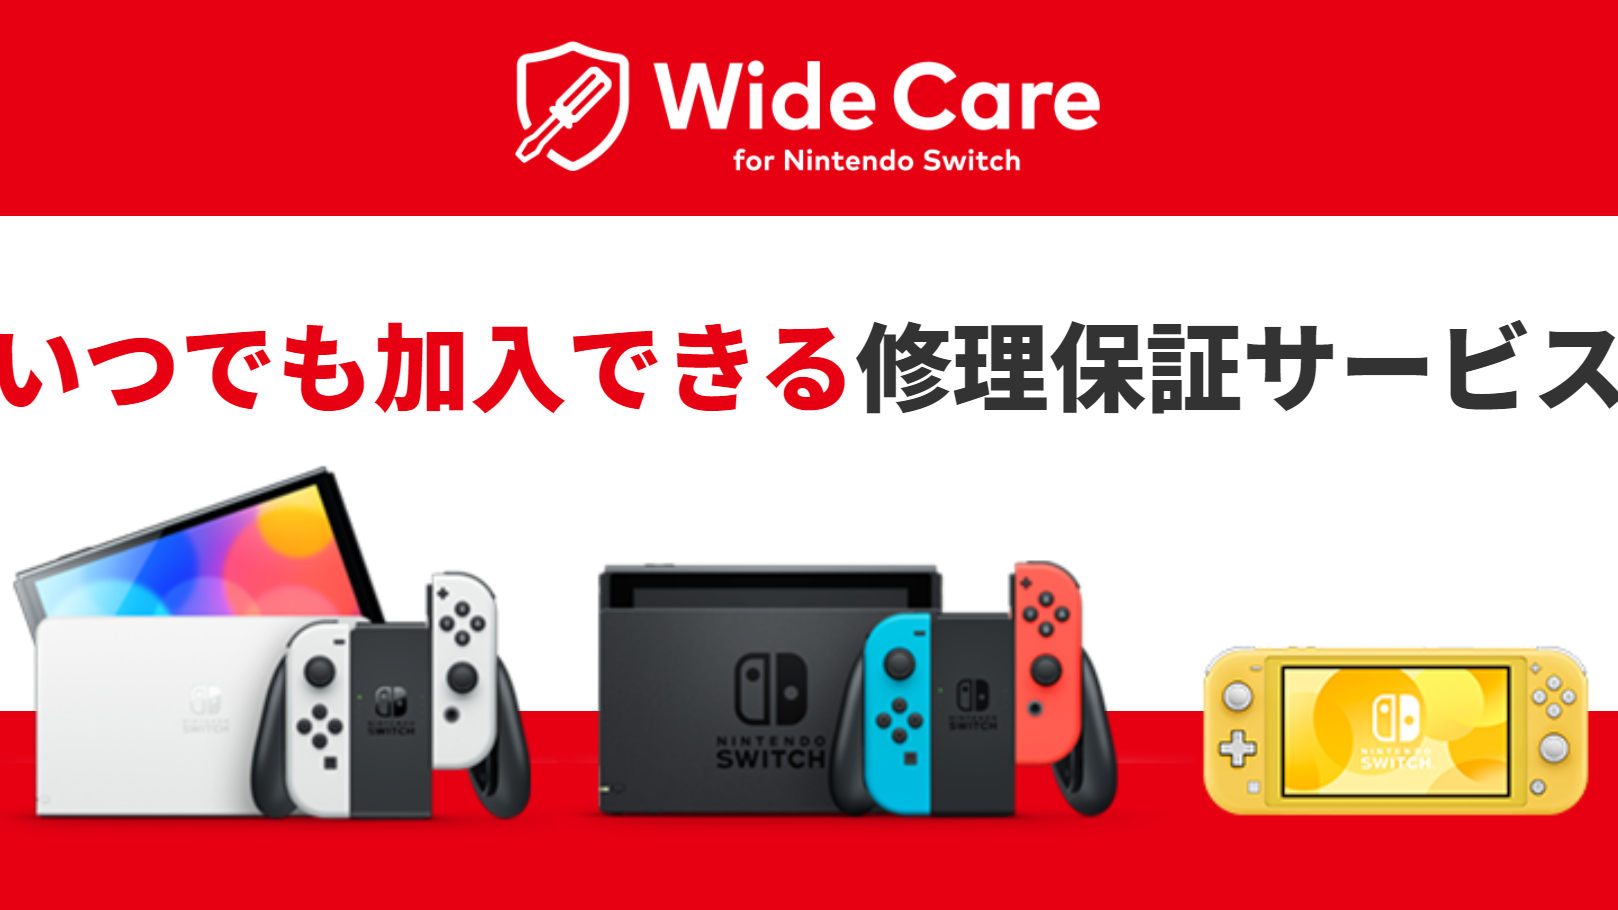 <div>I seriously hope Nintendo's official Joy-Con repair service comes to the West</div>